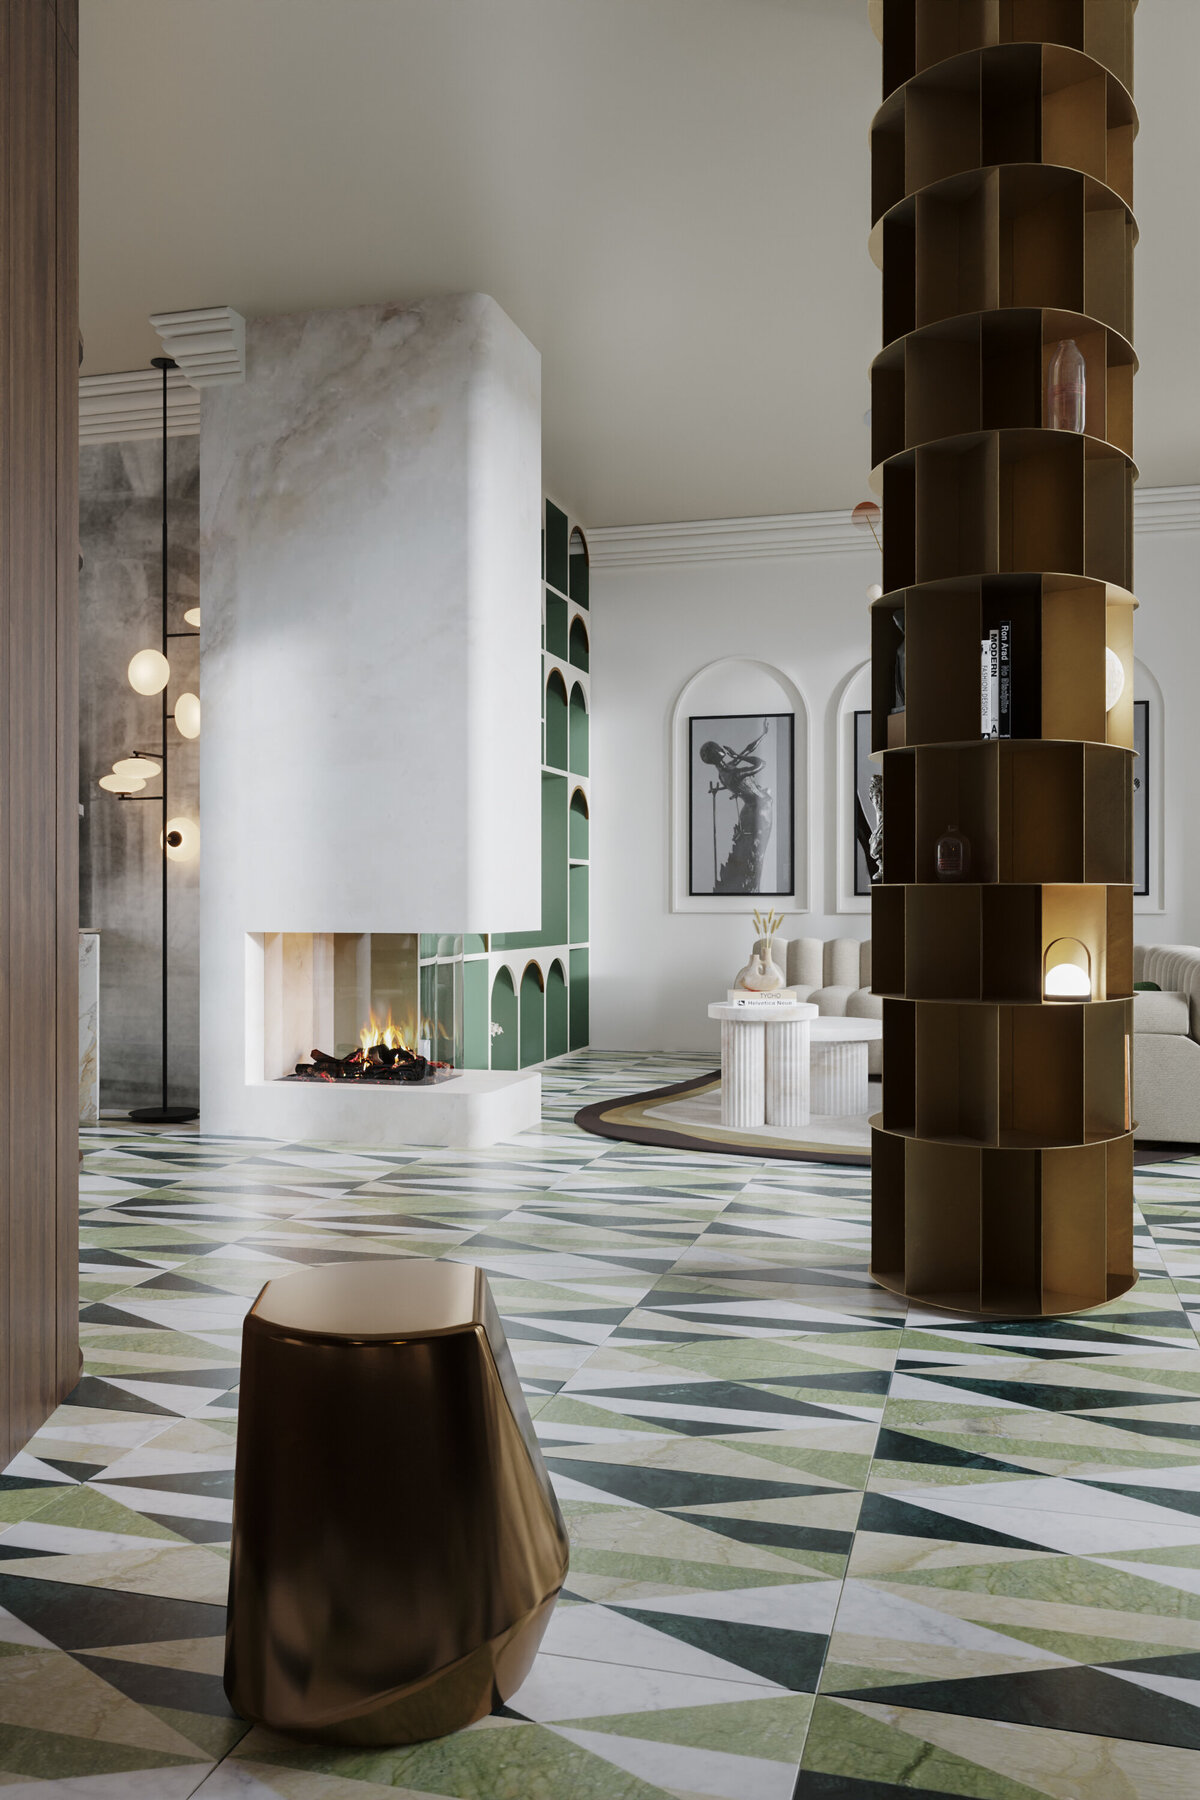 Living room with a green and white tile floor